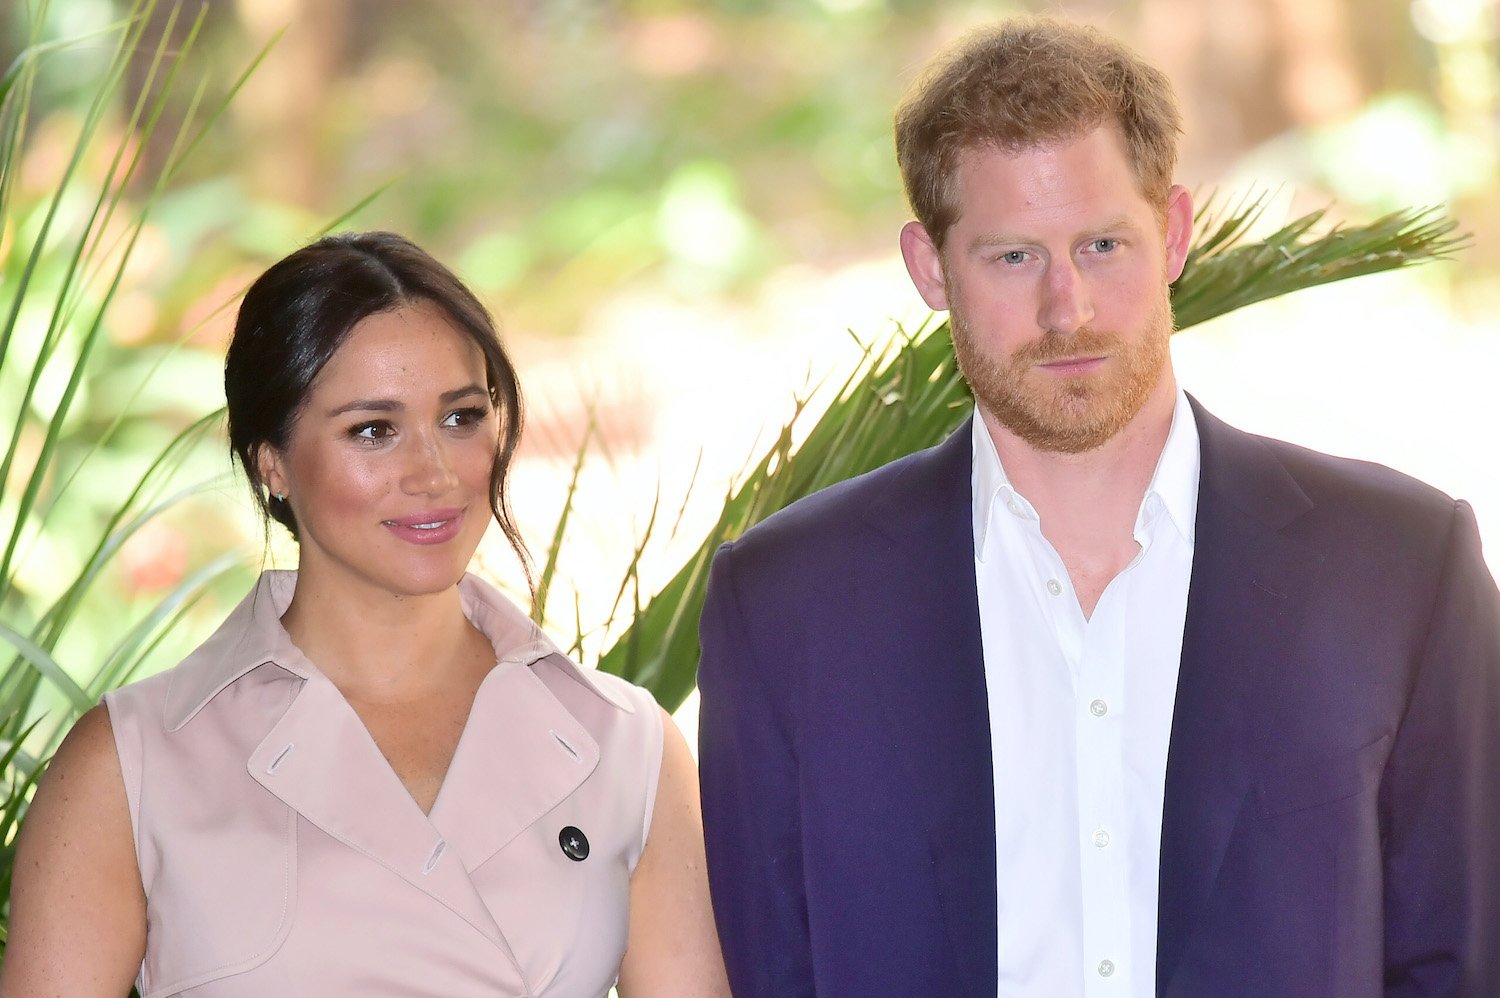 Prince Harry and Meghan Markle visit the British High Commissioner's residence to celebrate the UK and South Africa’s important business and investment relationship